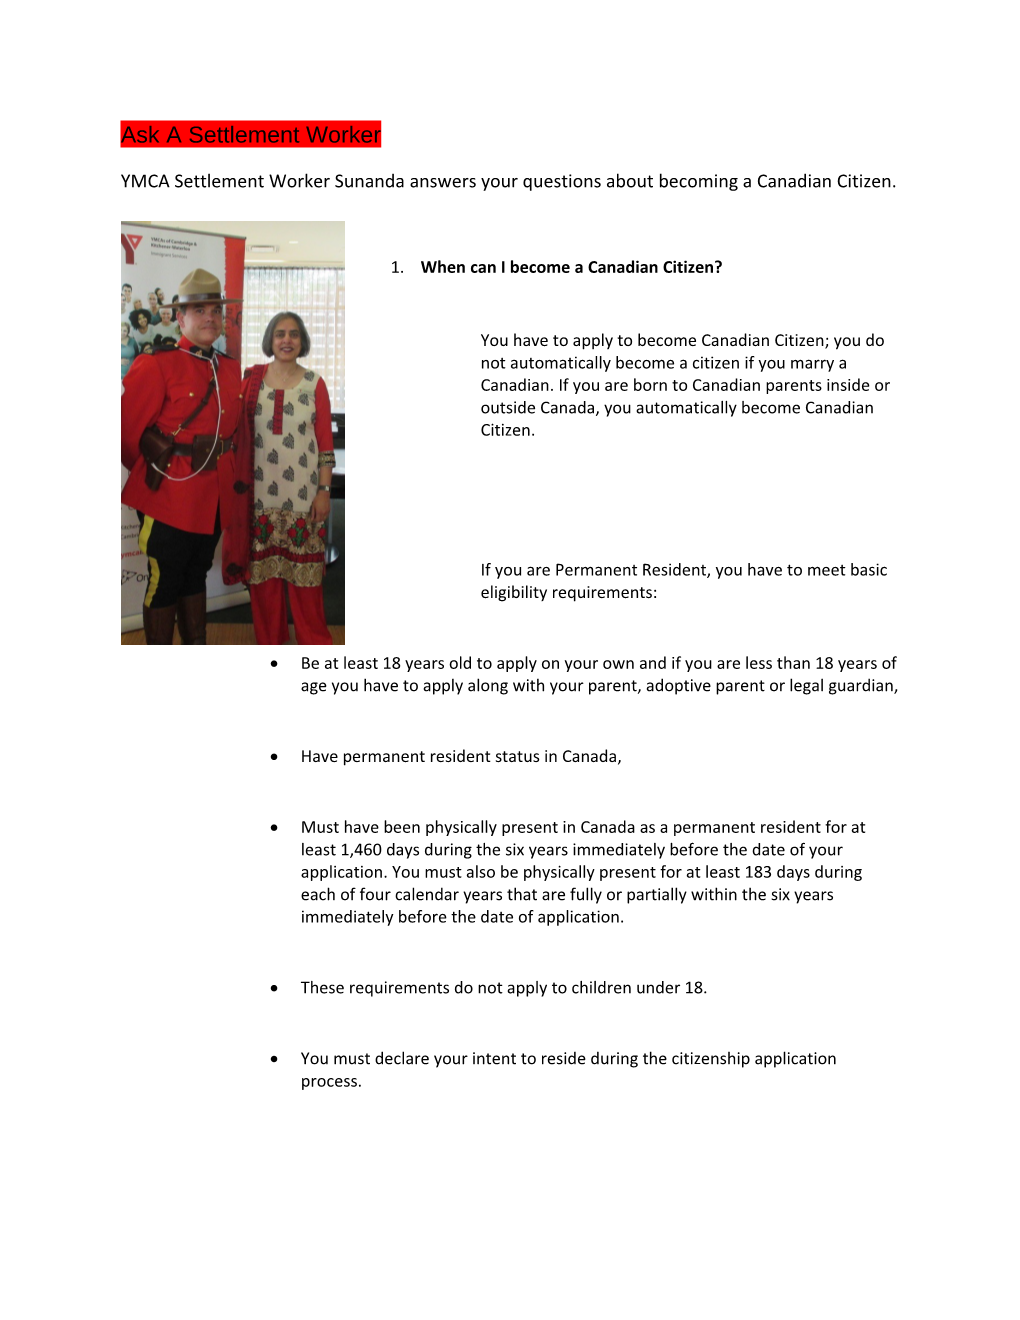 YMCA Settlement Worker Sunanda Answers Your Questions About Becoming a Canadian Citizen